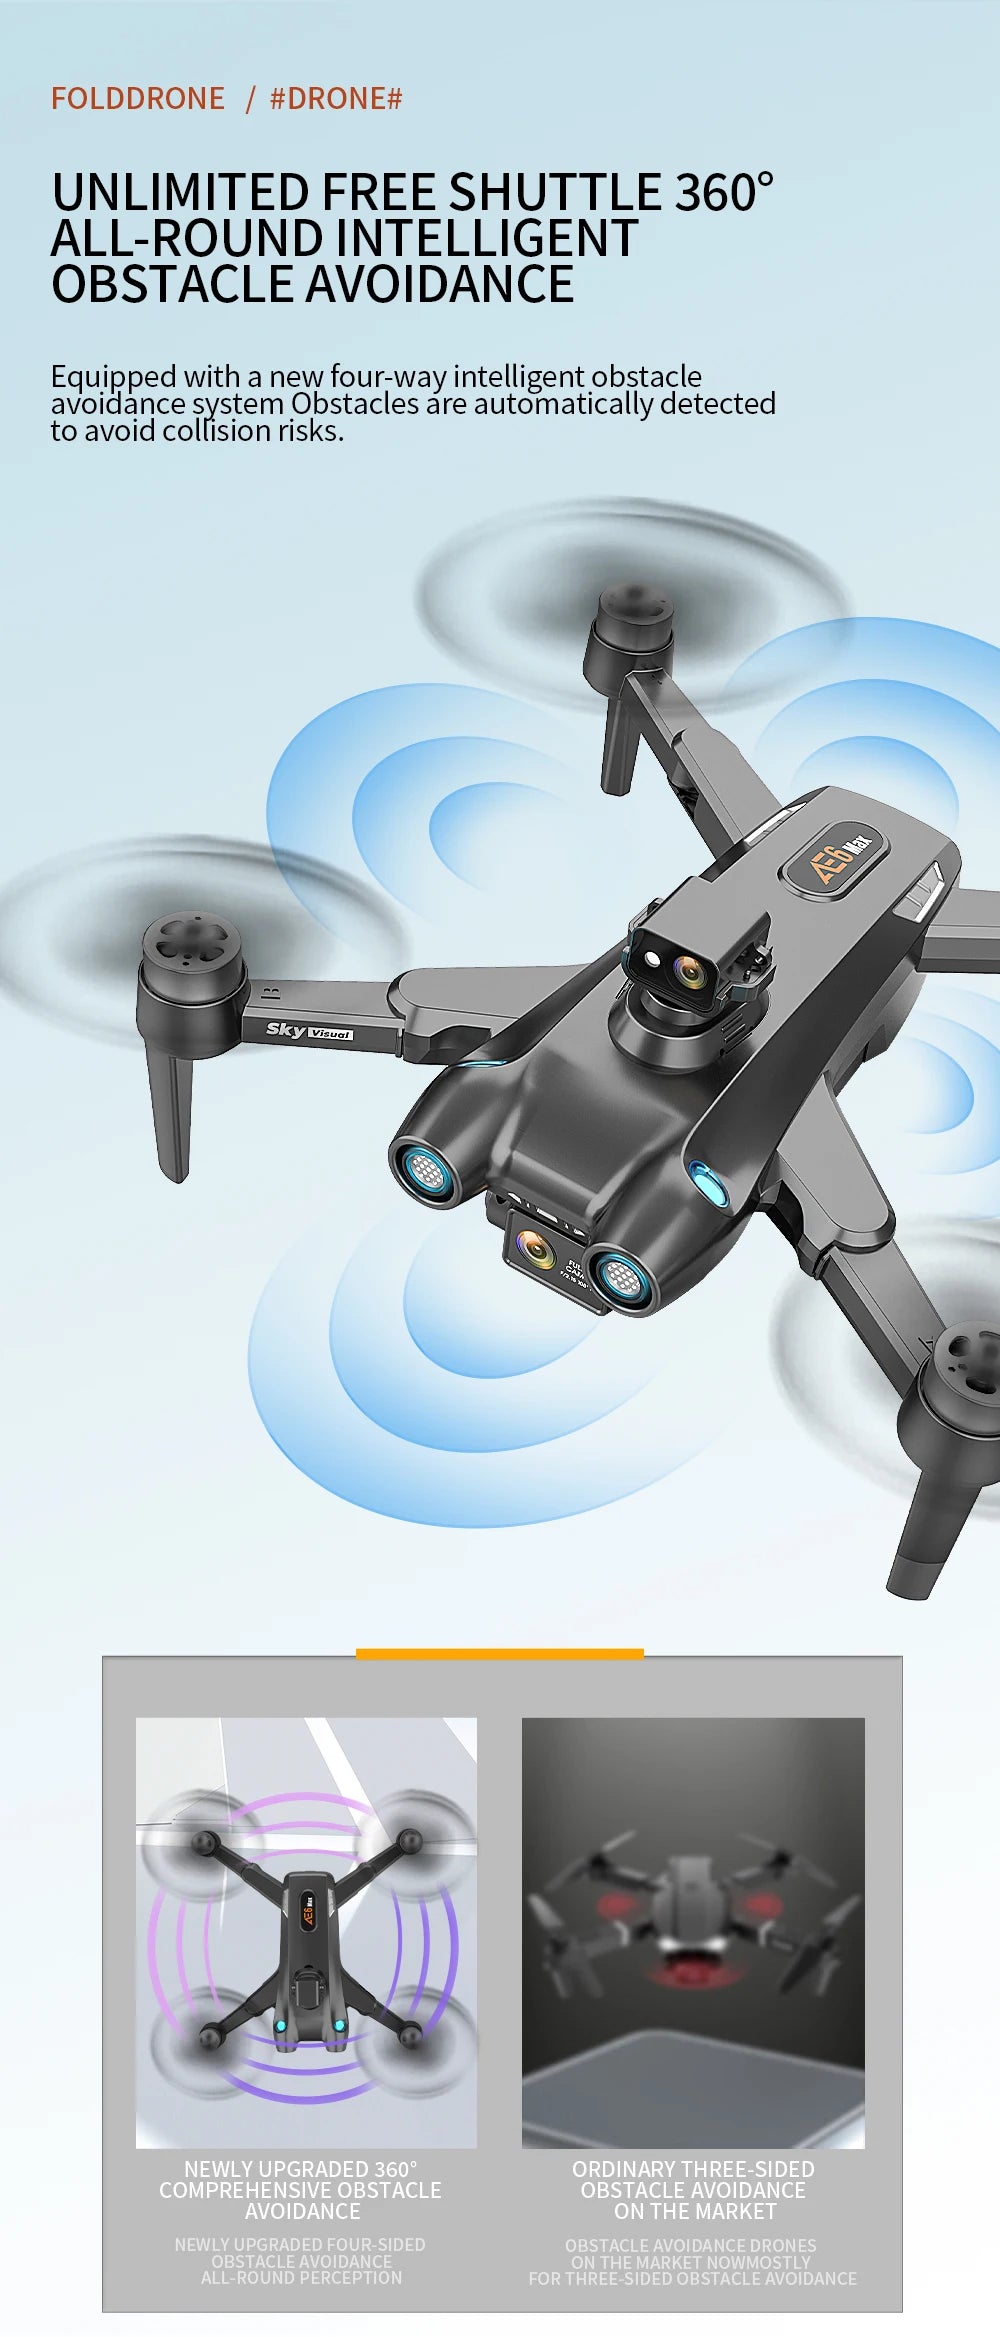 New AE6 / AE6 Max Drone, a new four-way intelligent obstacle coilsitent Obstacles are automatically detected